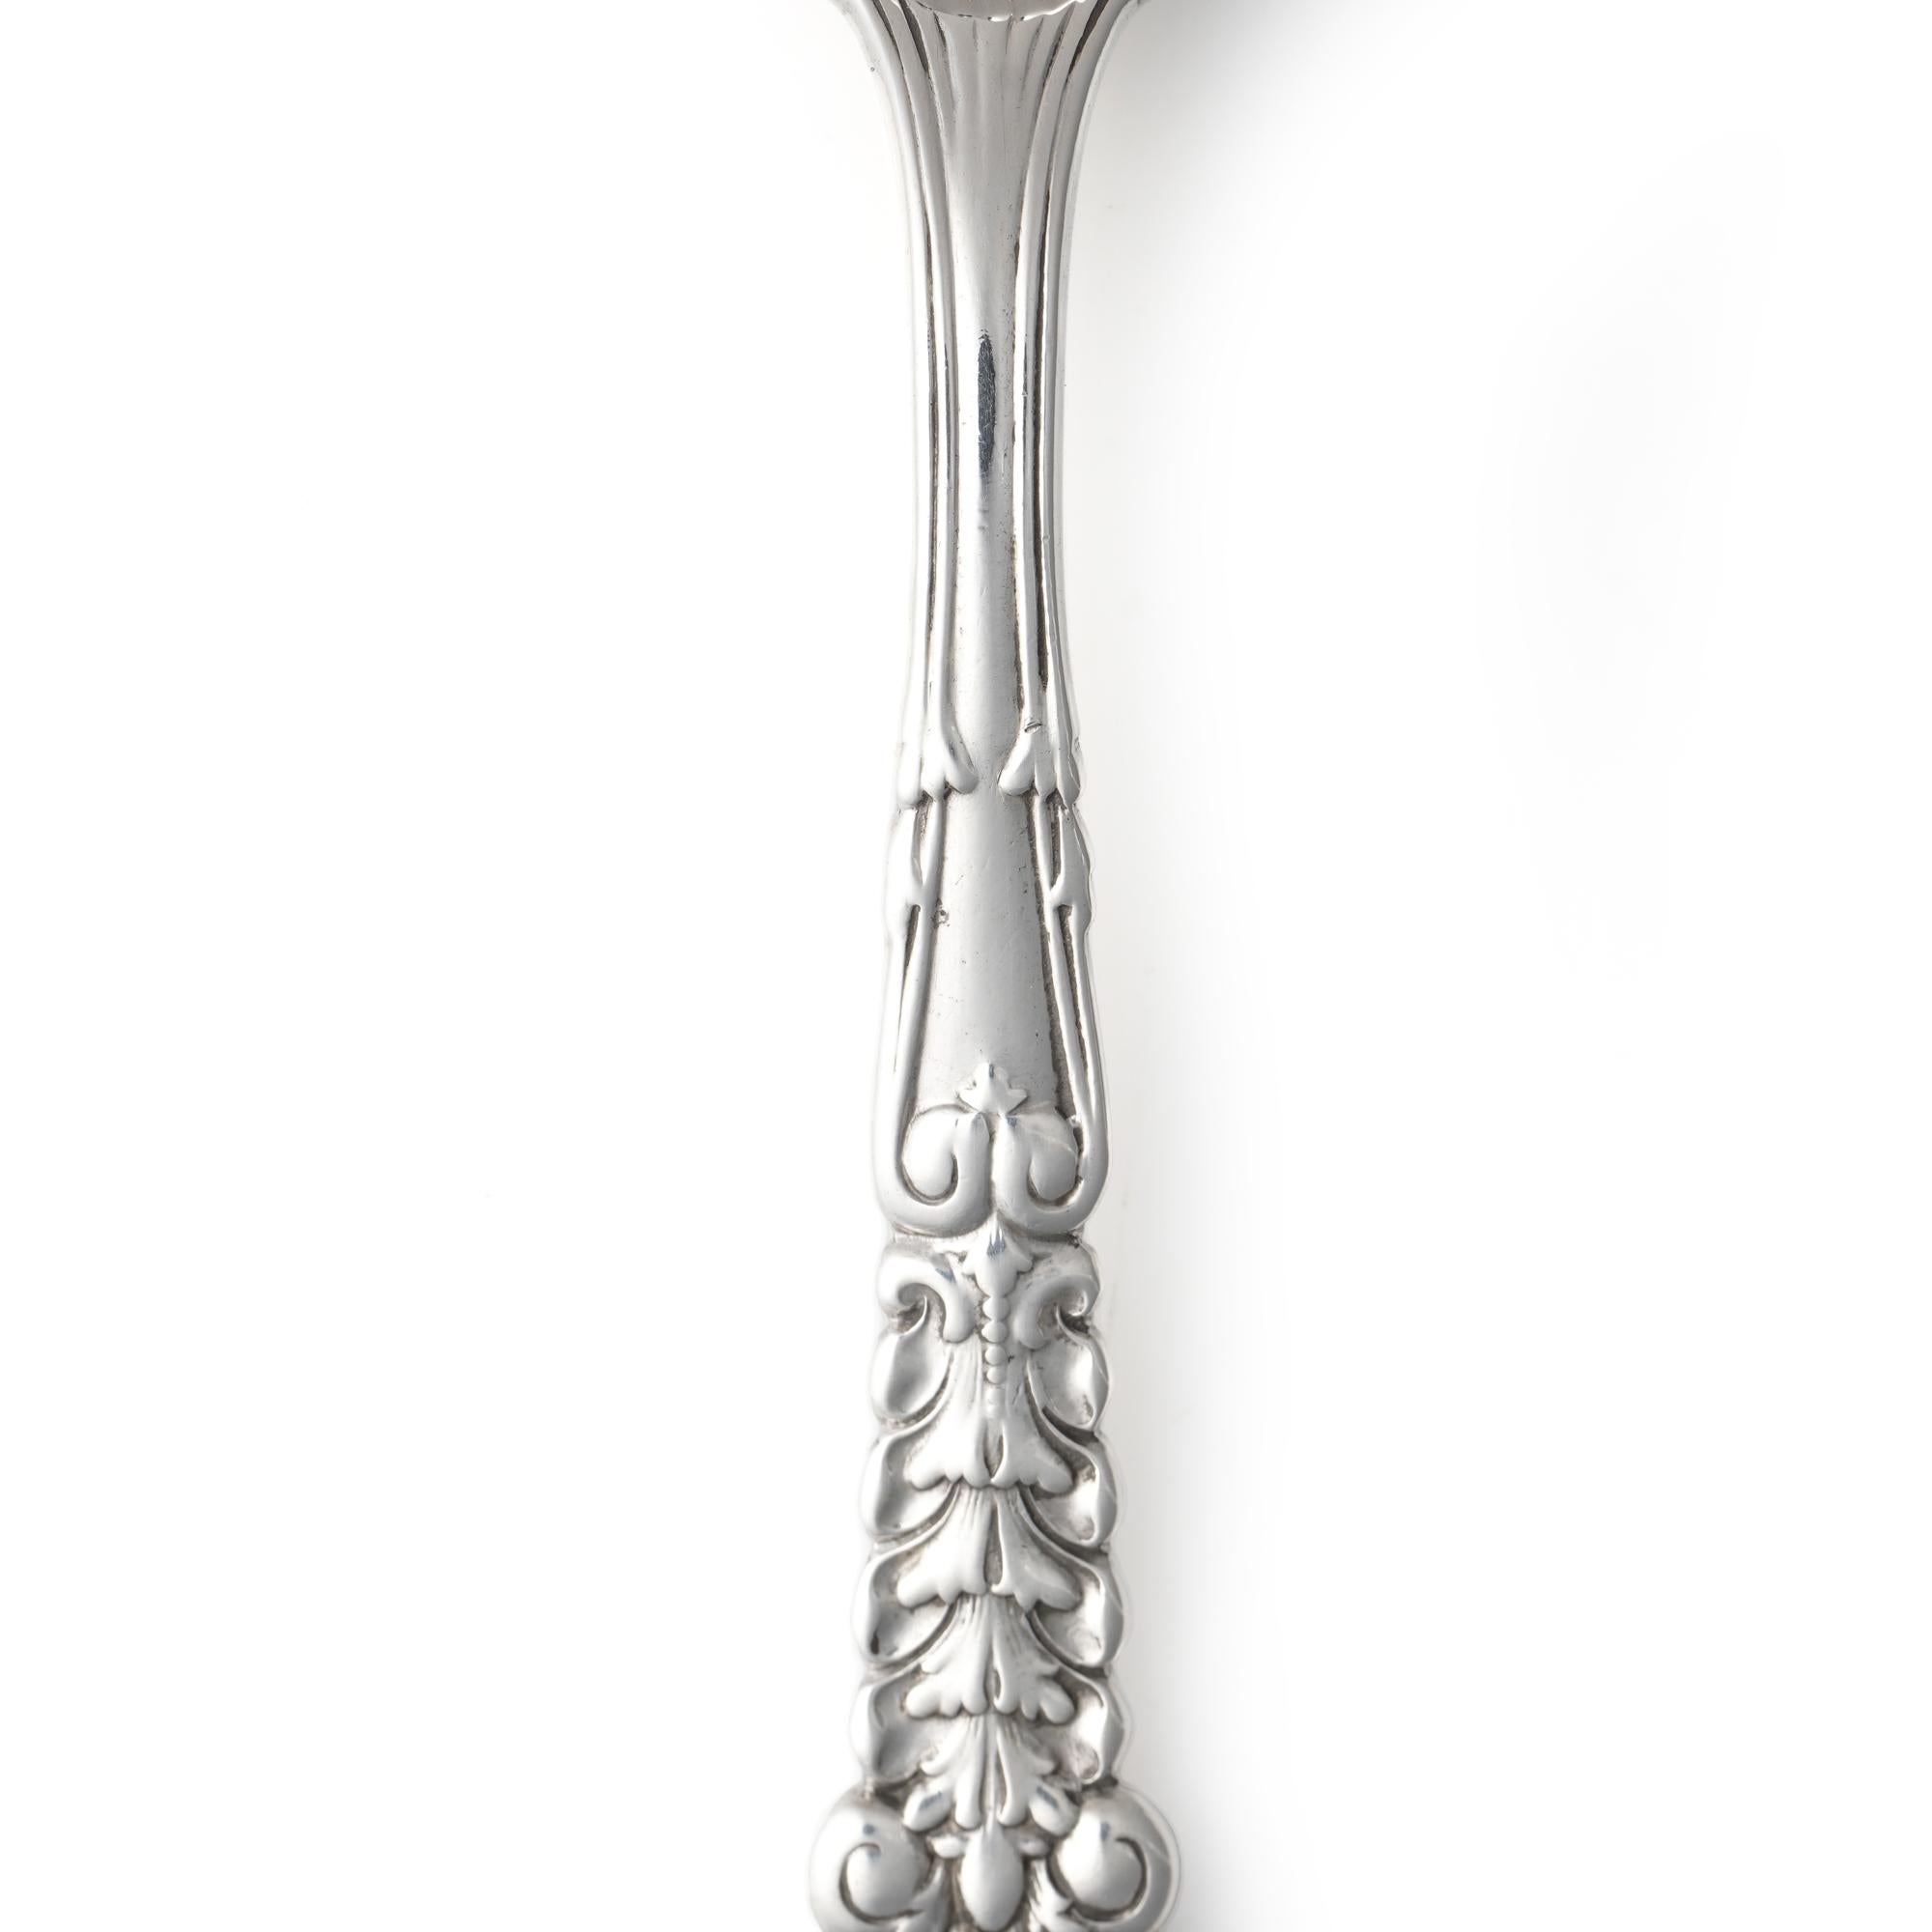 Antique Tiffany & Co. Sterling Silver Florentine Pattern Teaspoon For Sale 3